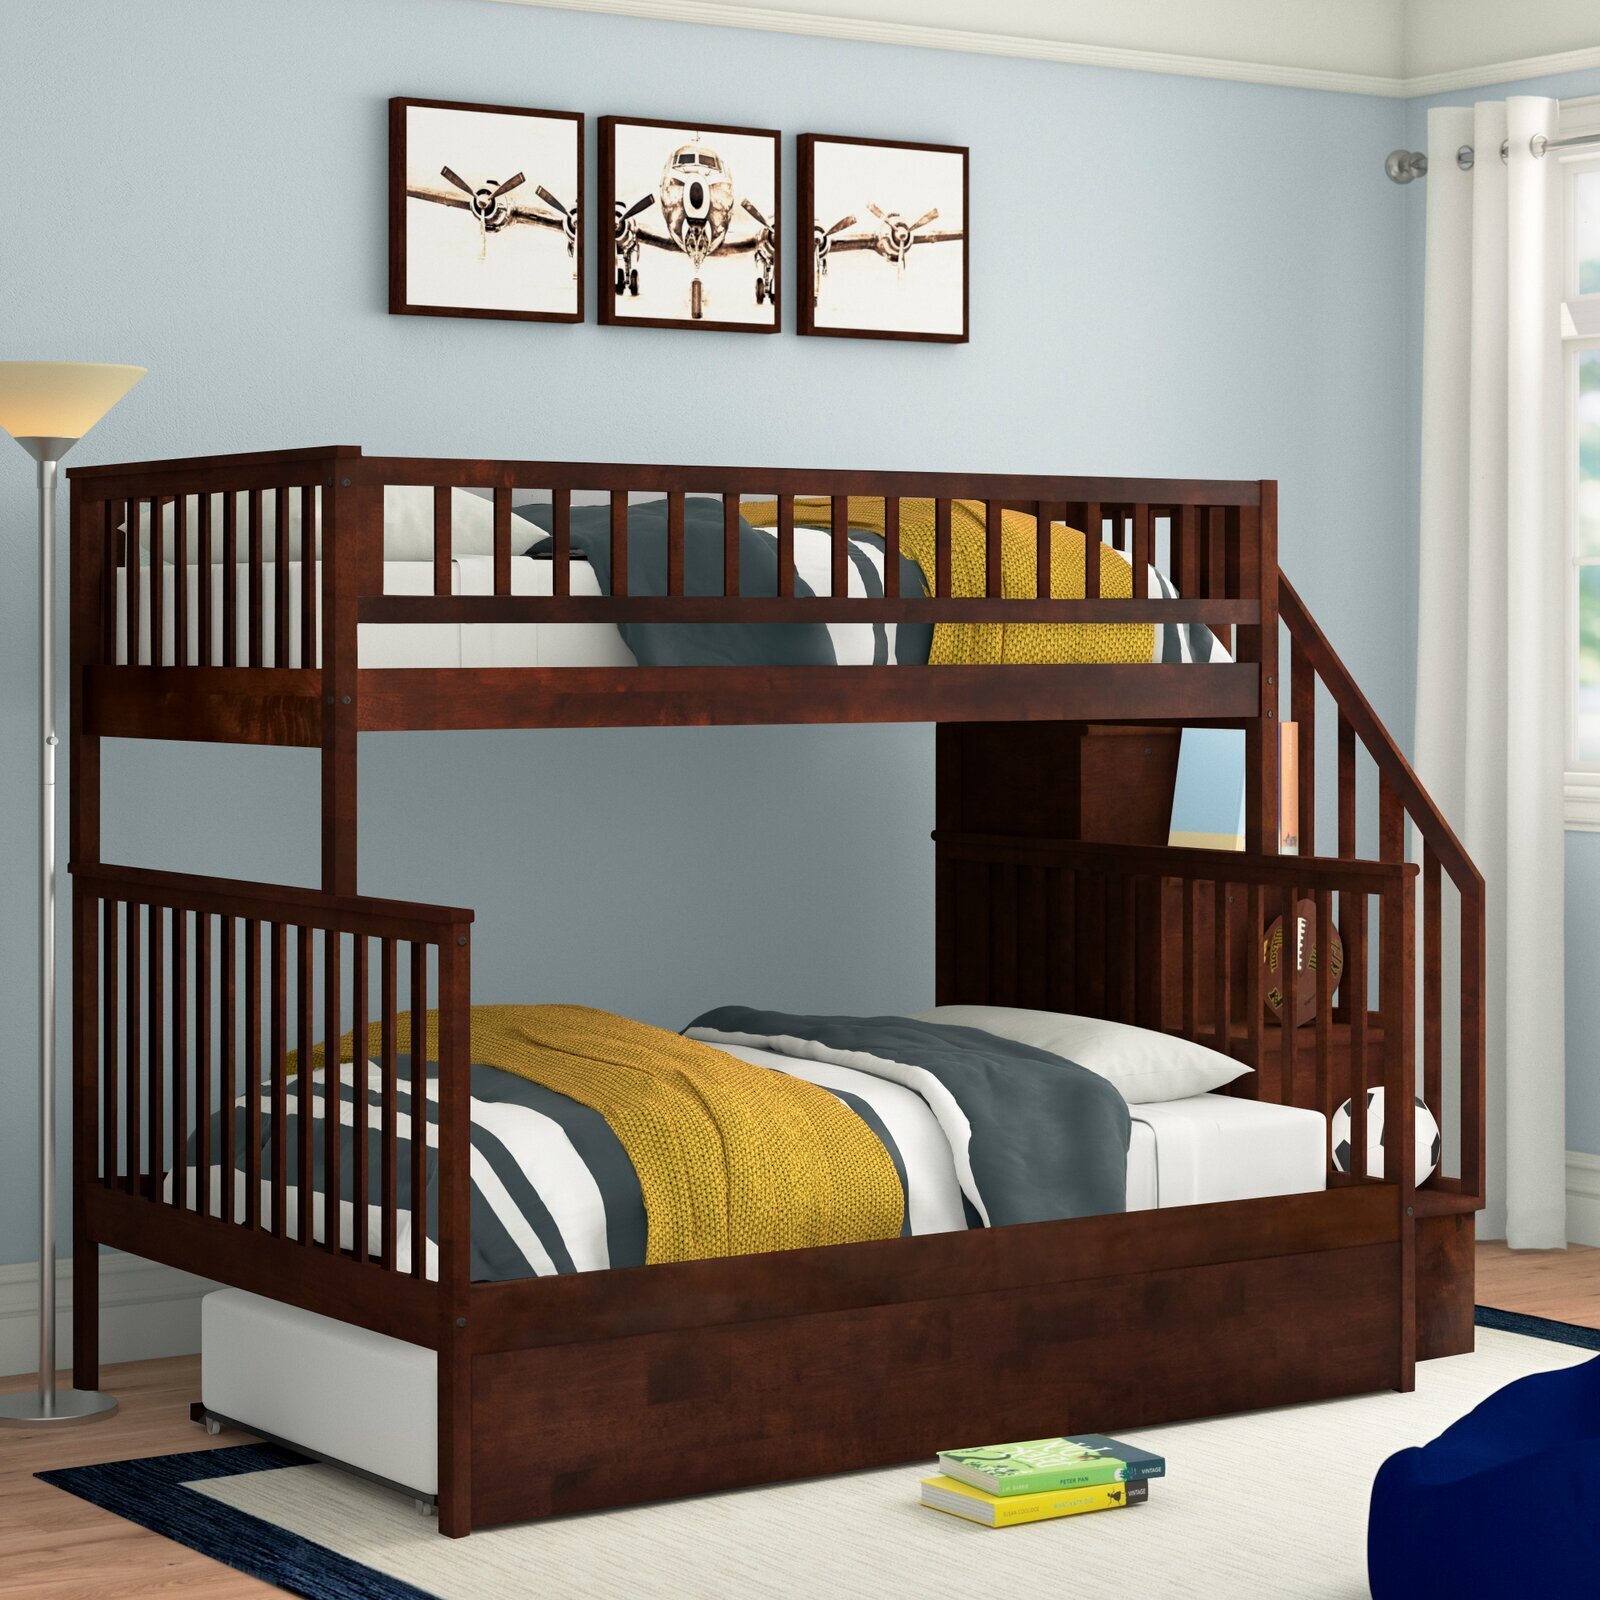 Bunk Bed with Open Shelves